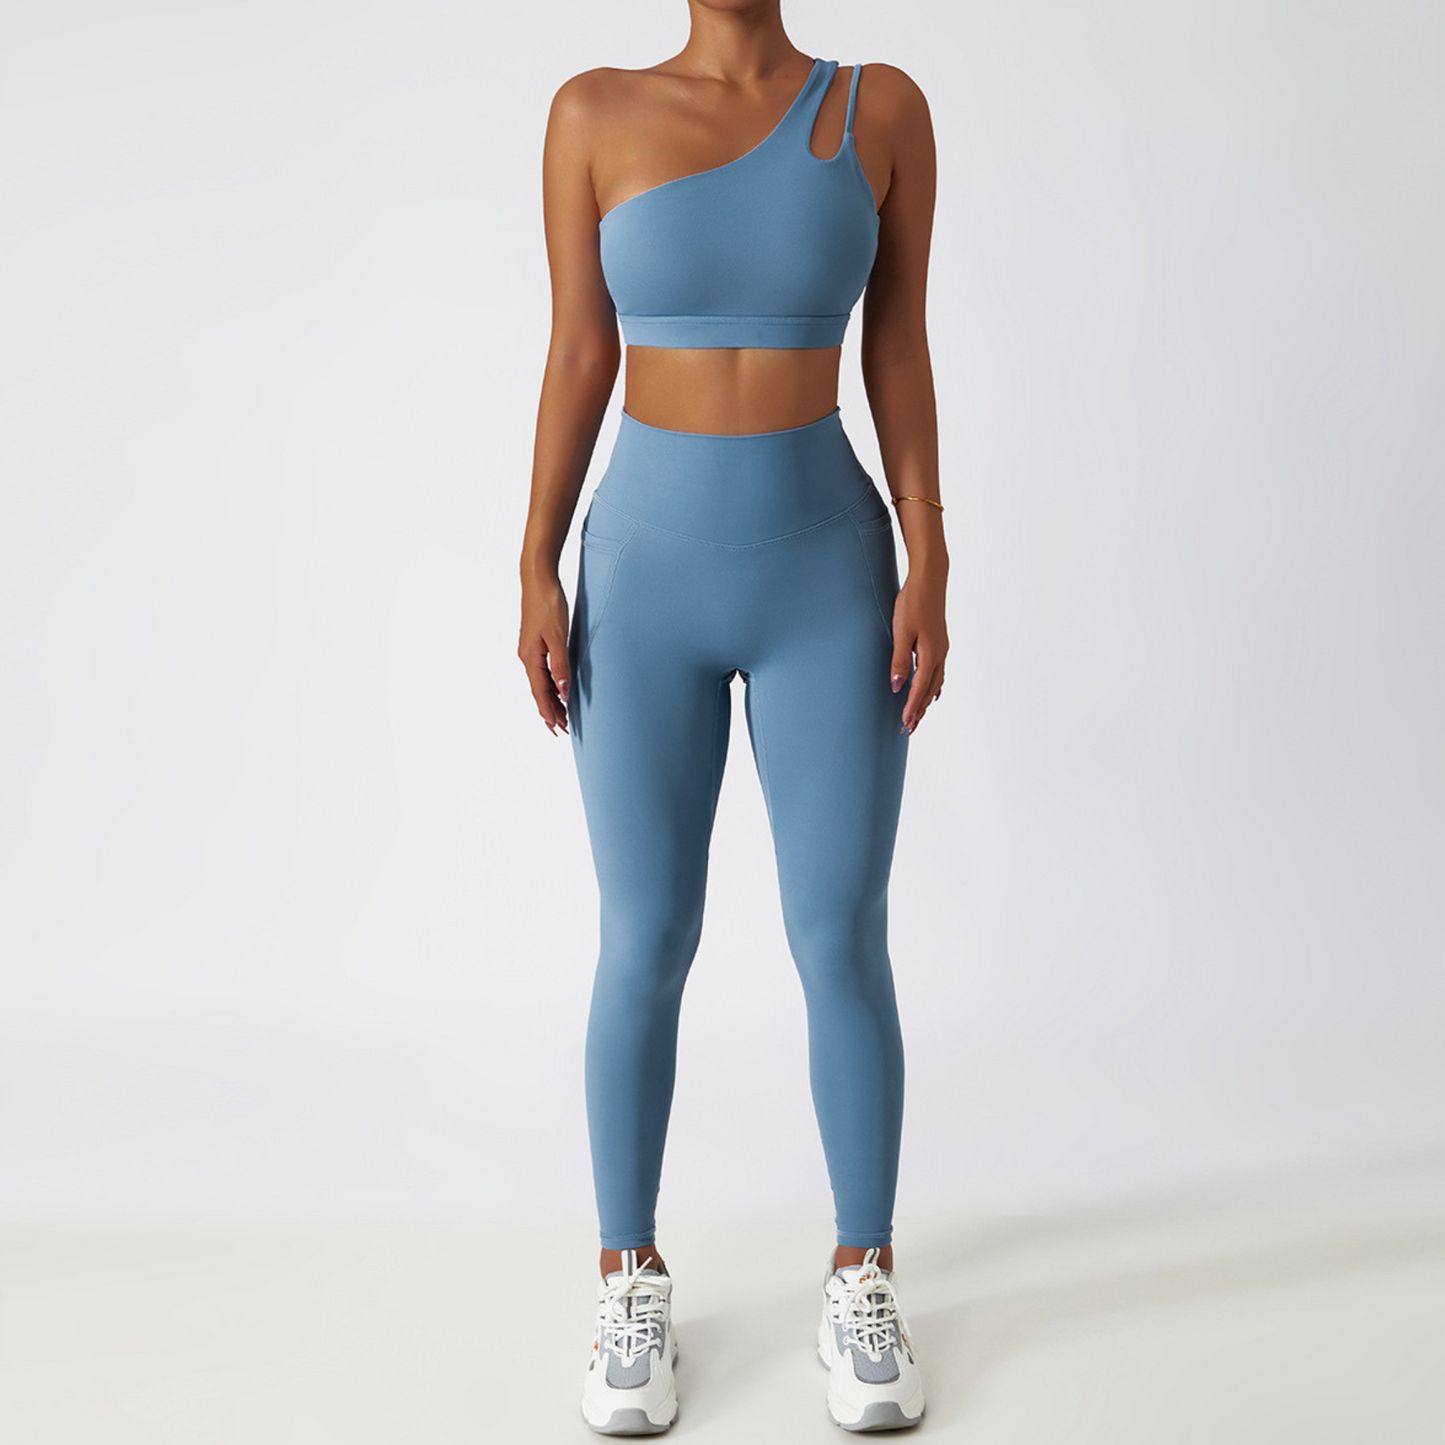 Fitness model wearing a one shoulder, sexy and squat proof matching set in the colour azure from vibras activewear.